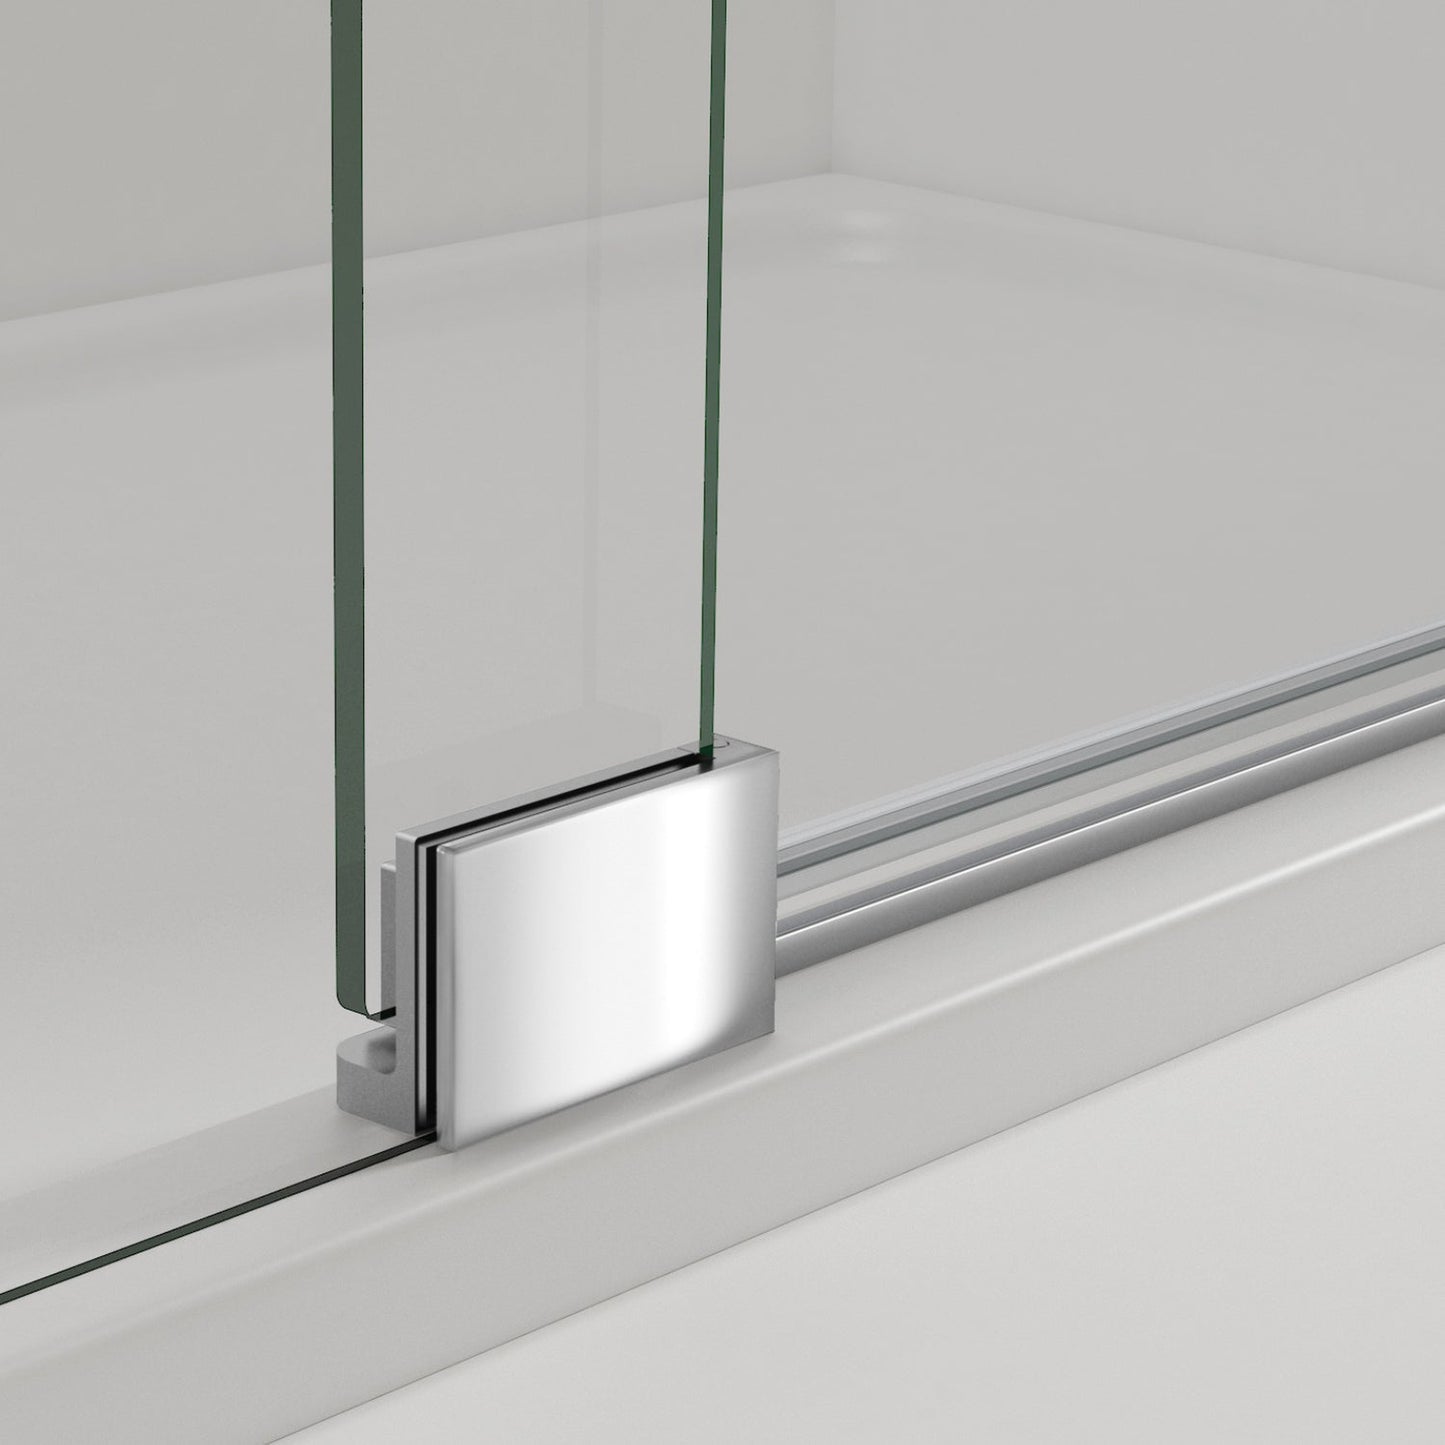 Vinnova Milano 66" x 72" Polished Chrome In-line Hinged Frameless Shower Door With Fixed Glass on Both Sides